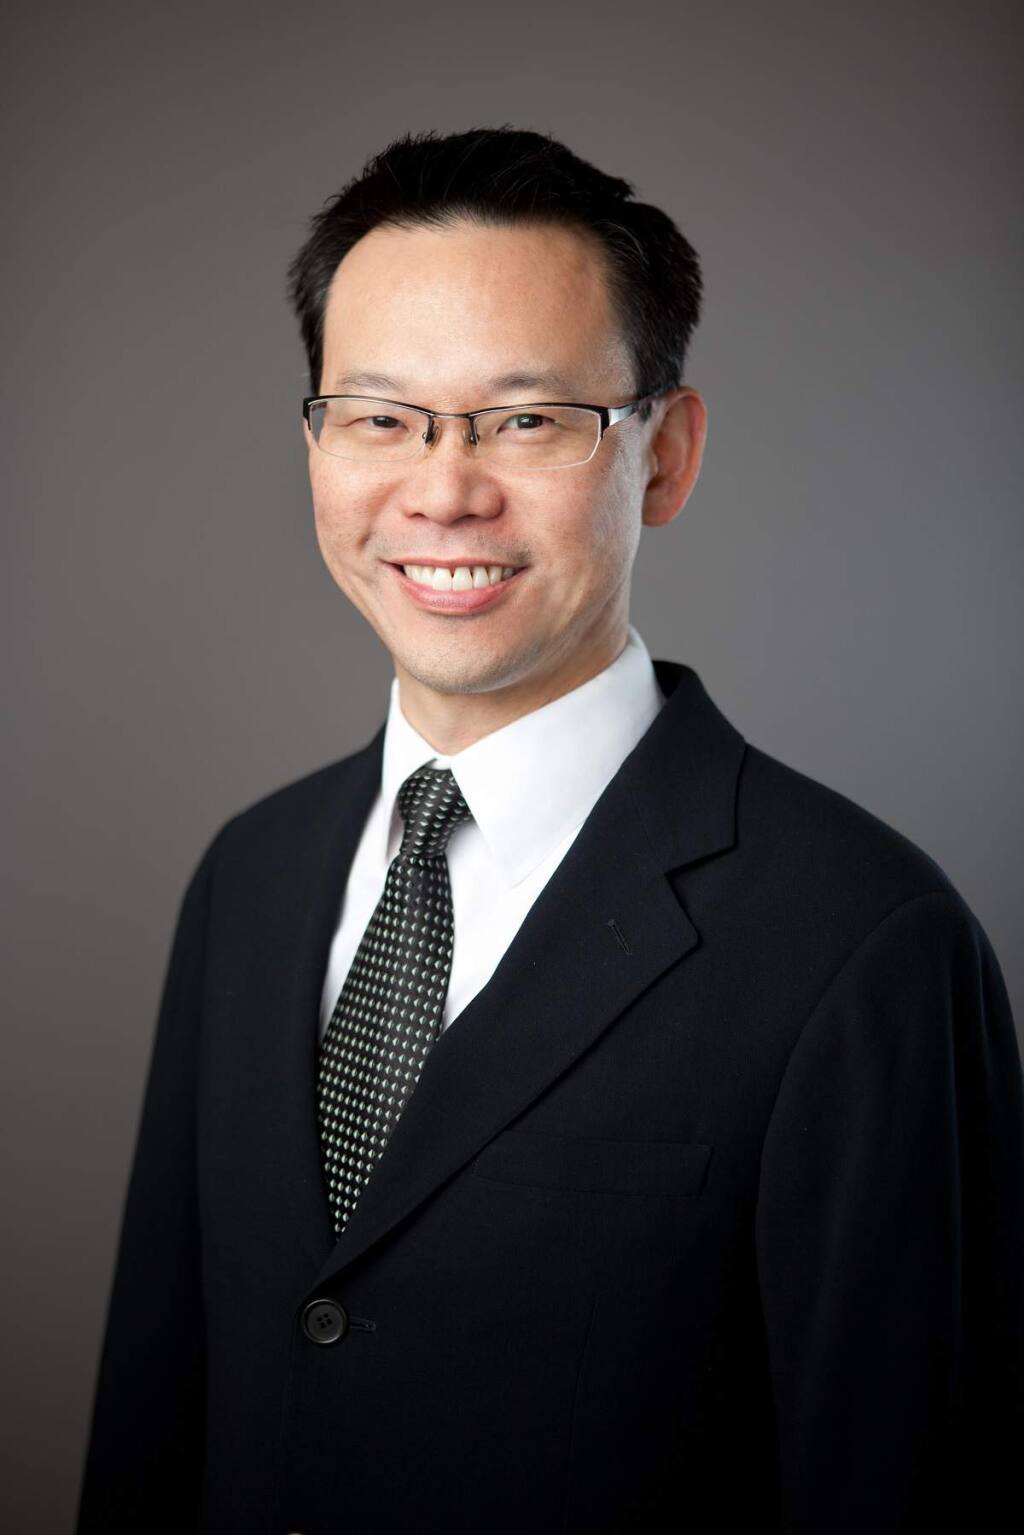 Jason Whong is a senior wealth planning strategist for The Private Client Reserve of U.S. Bank.